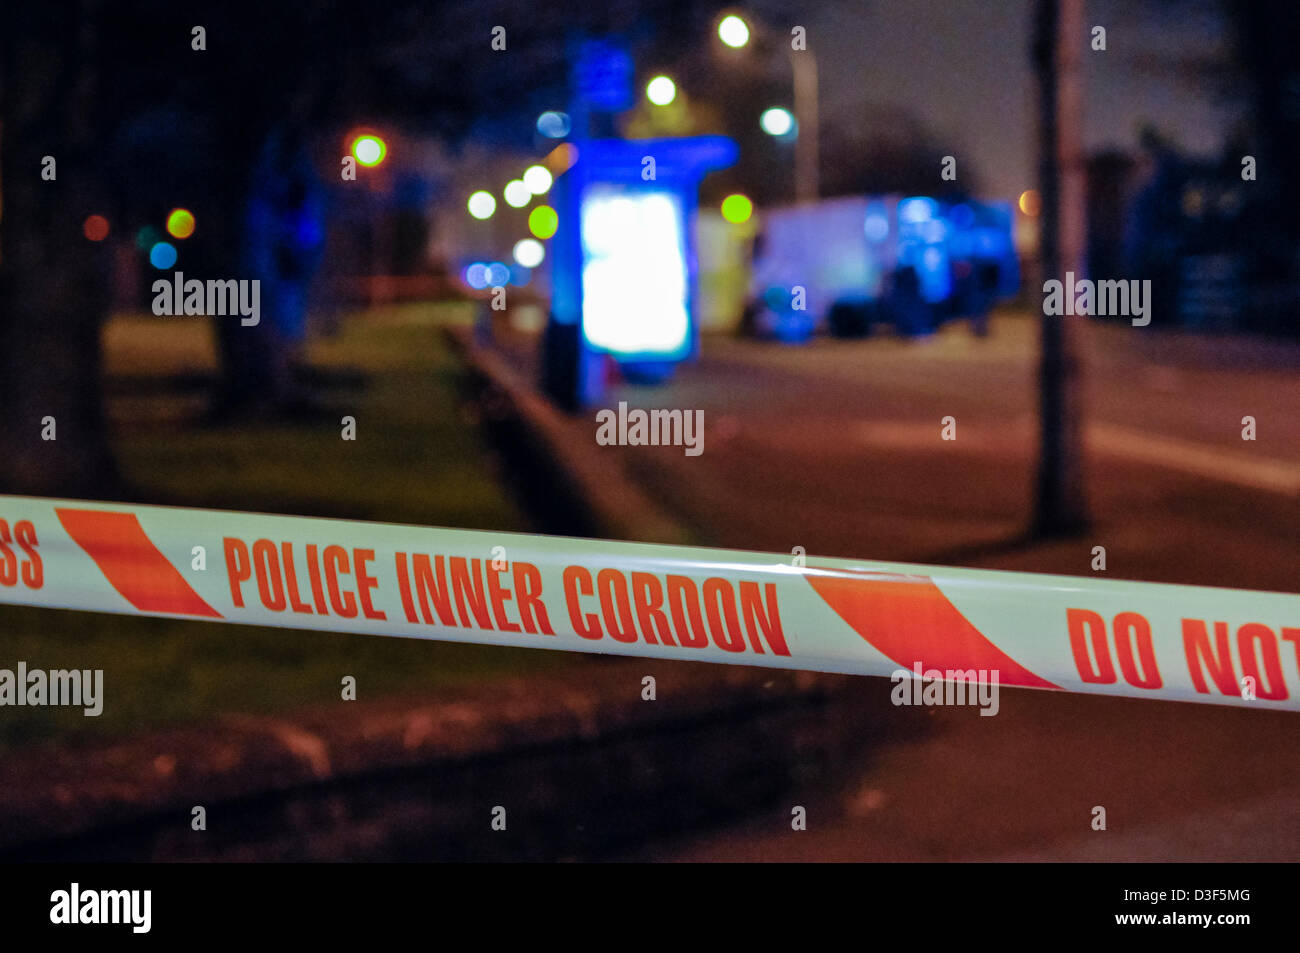 Police tape is stretched around a cordoned off area during a security alert in Northern Ireland Stock Photo